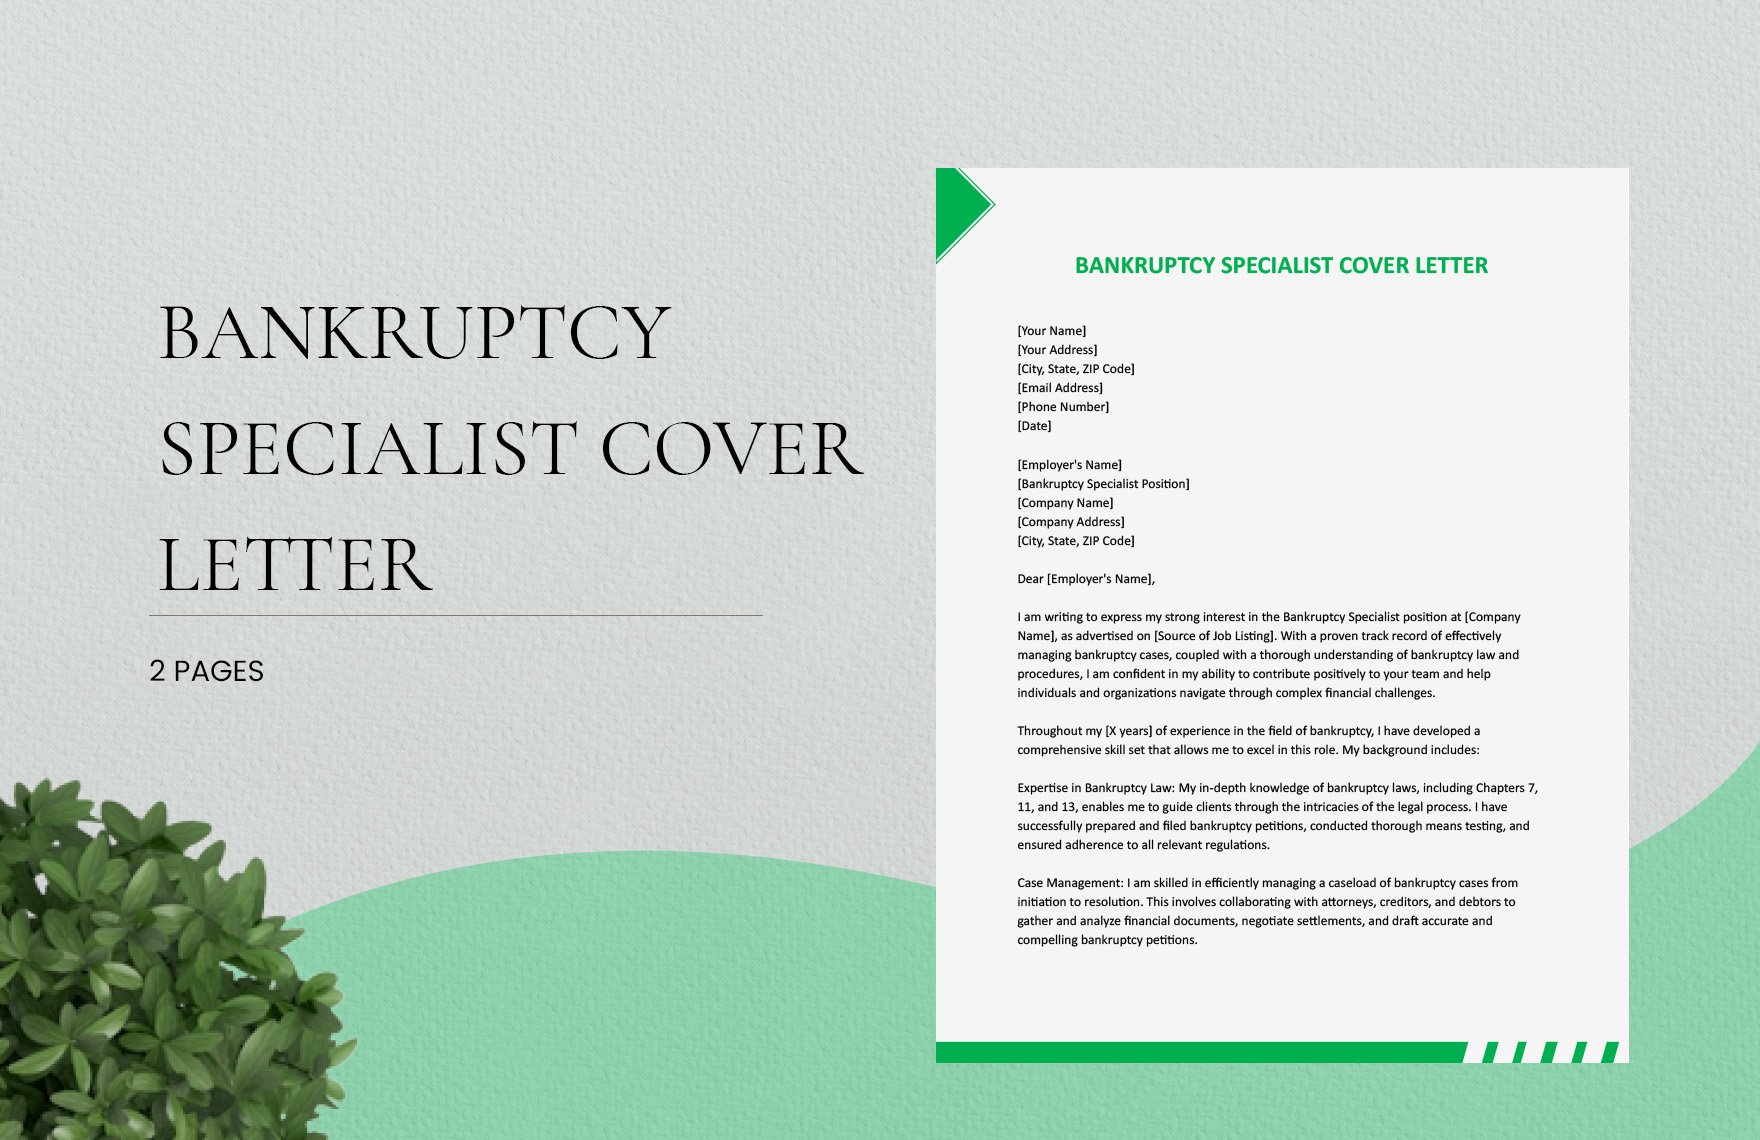 Bankruptcy Specialist Cover Letter in Word, Google Docs